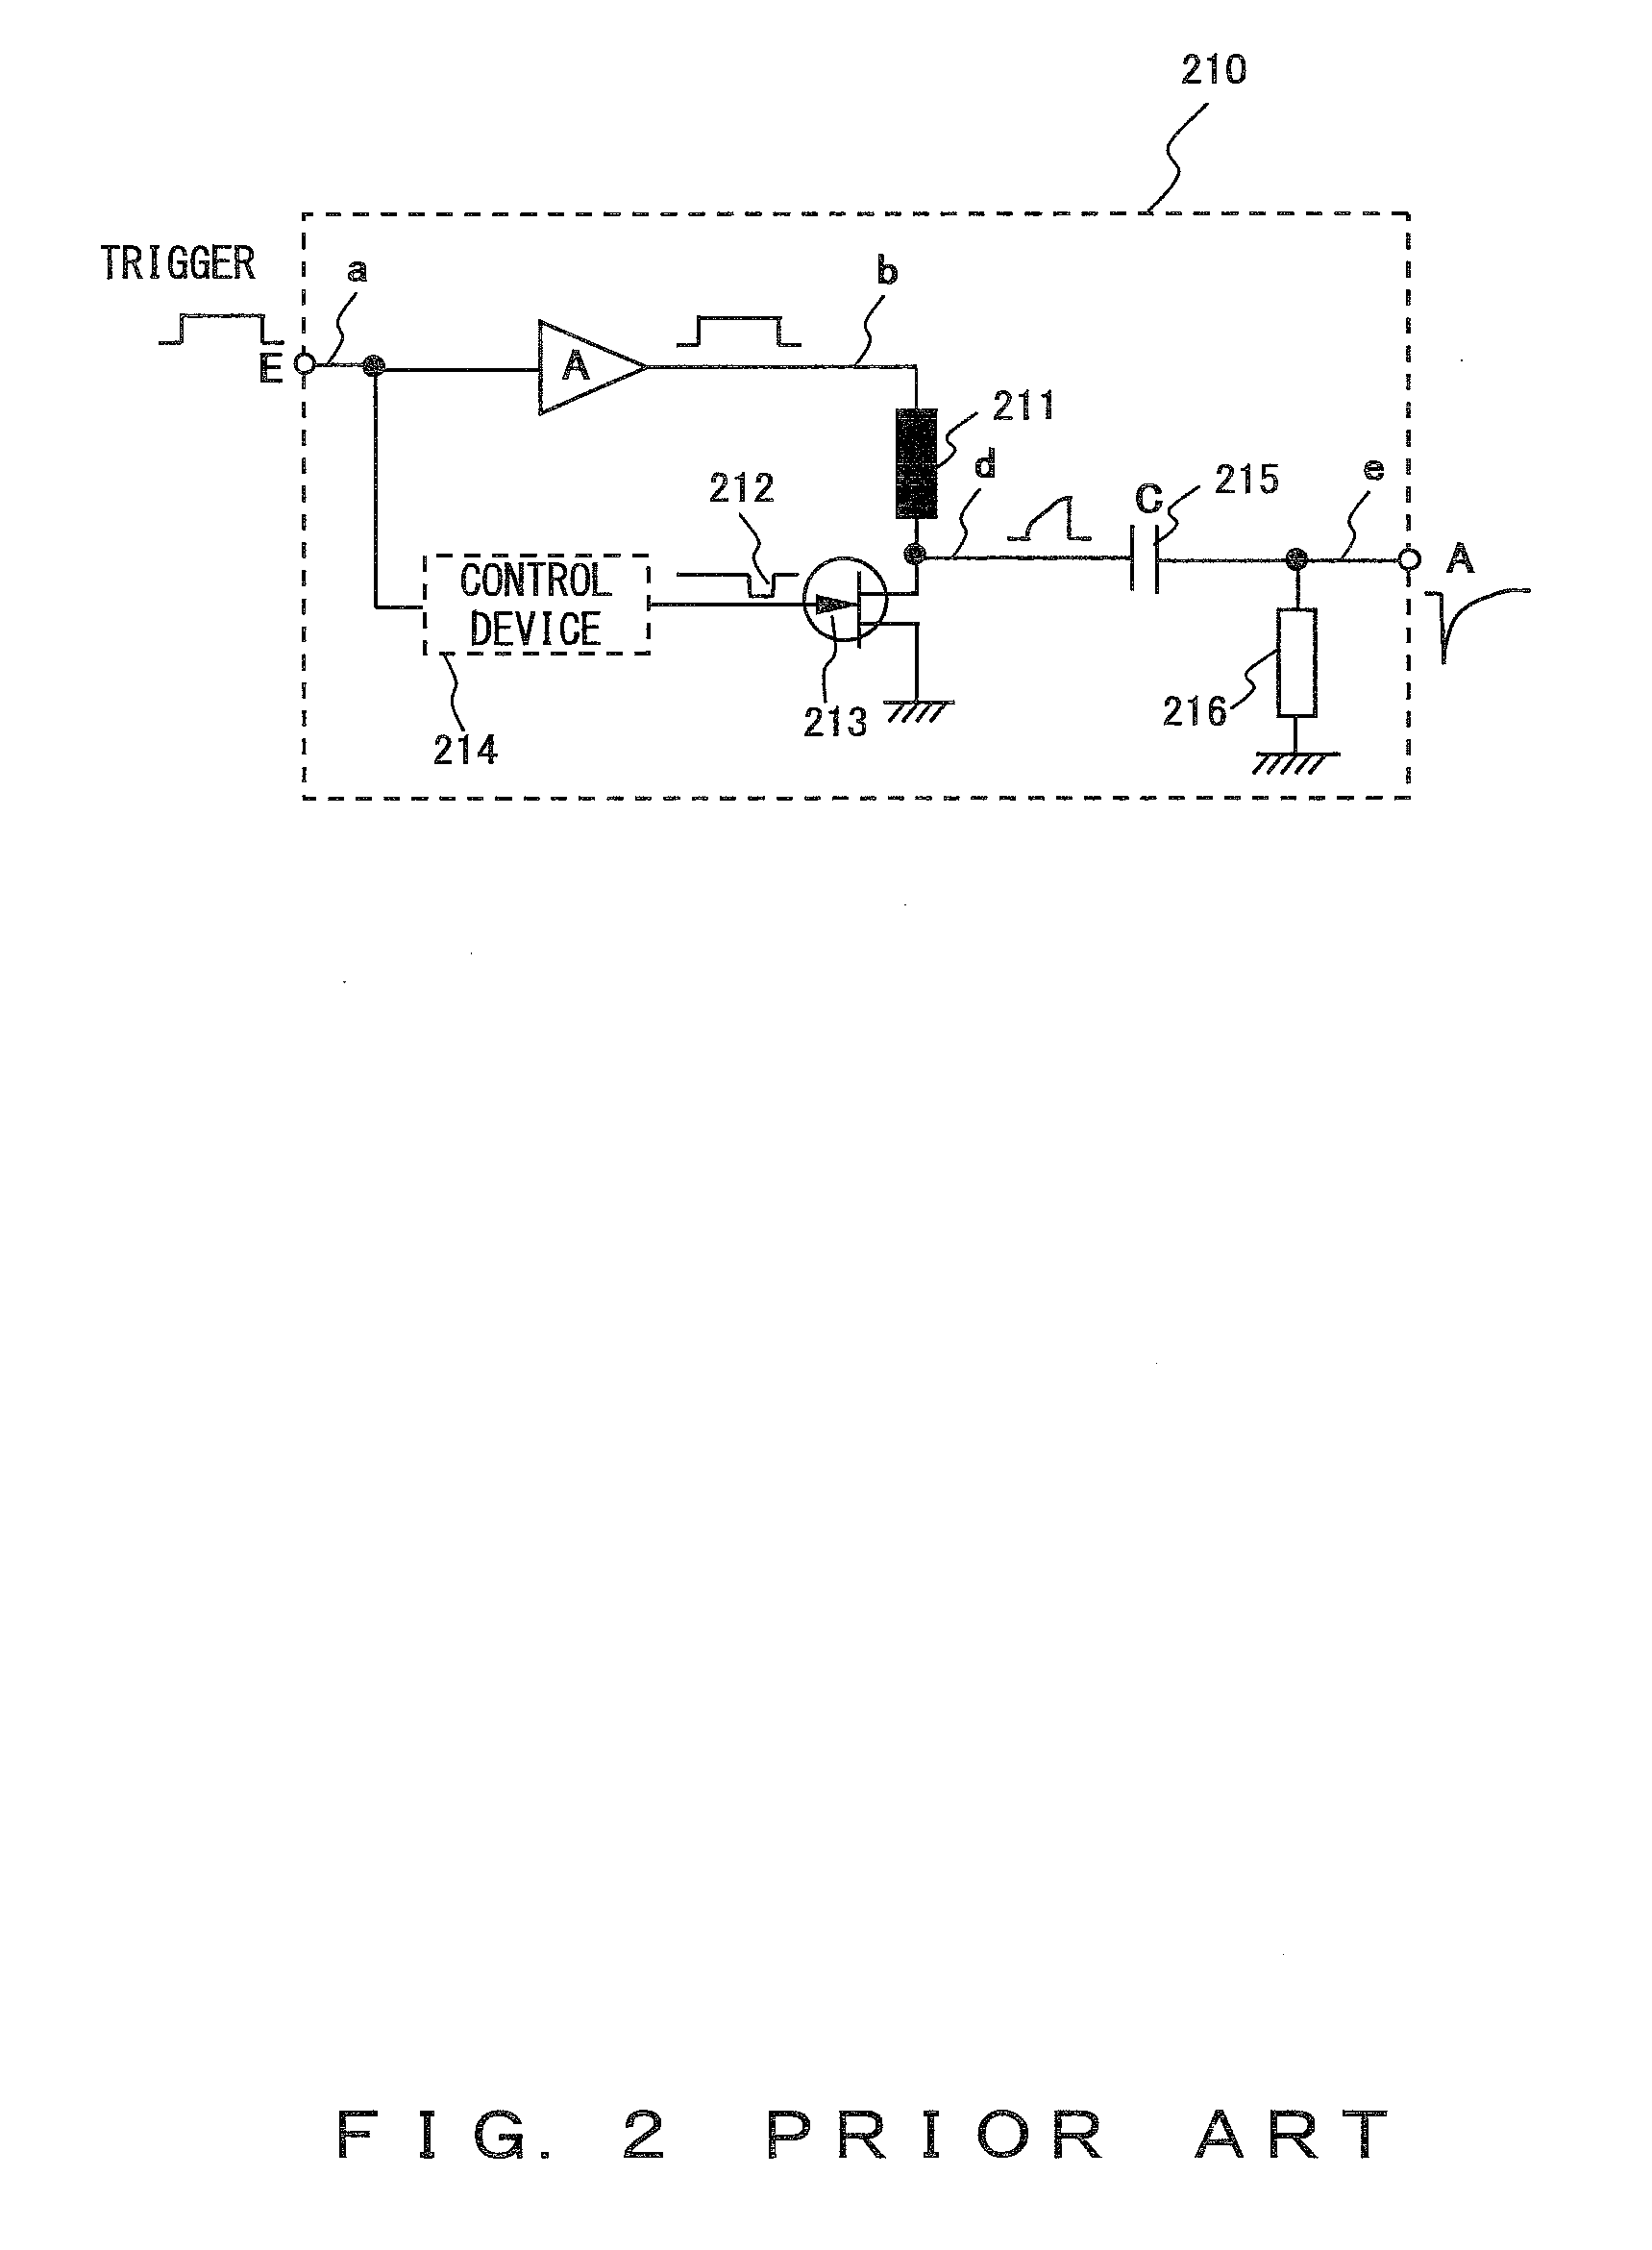 CAPACITIVE MICROMACHINED ULTRASONIC TRANSDUCER (cMUT) DEVICE AND METHOD OF CONTROLLING THE SAME